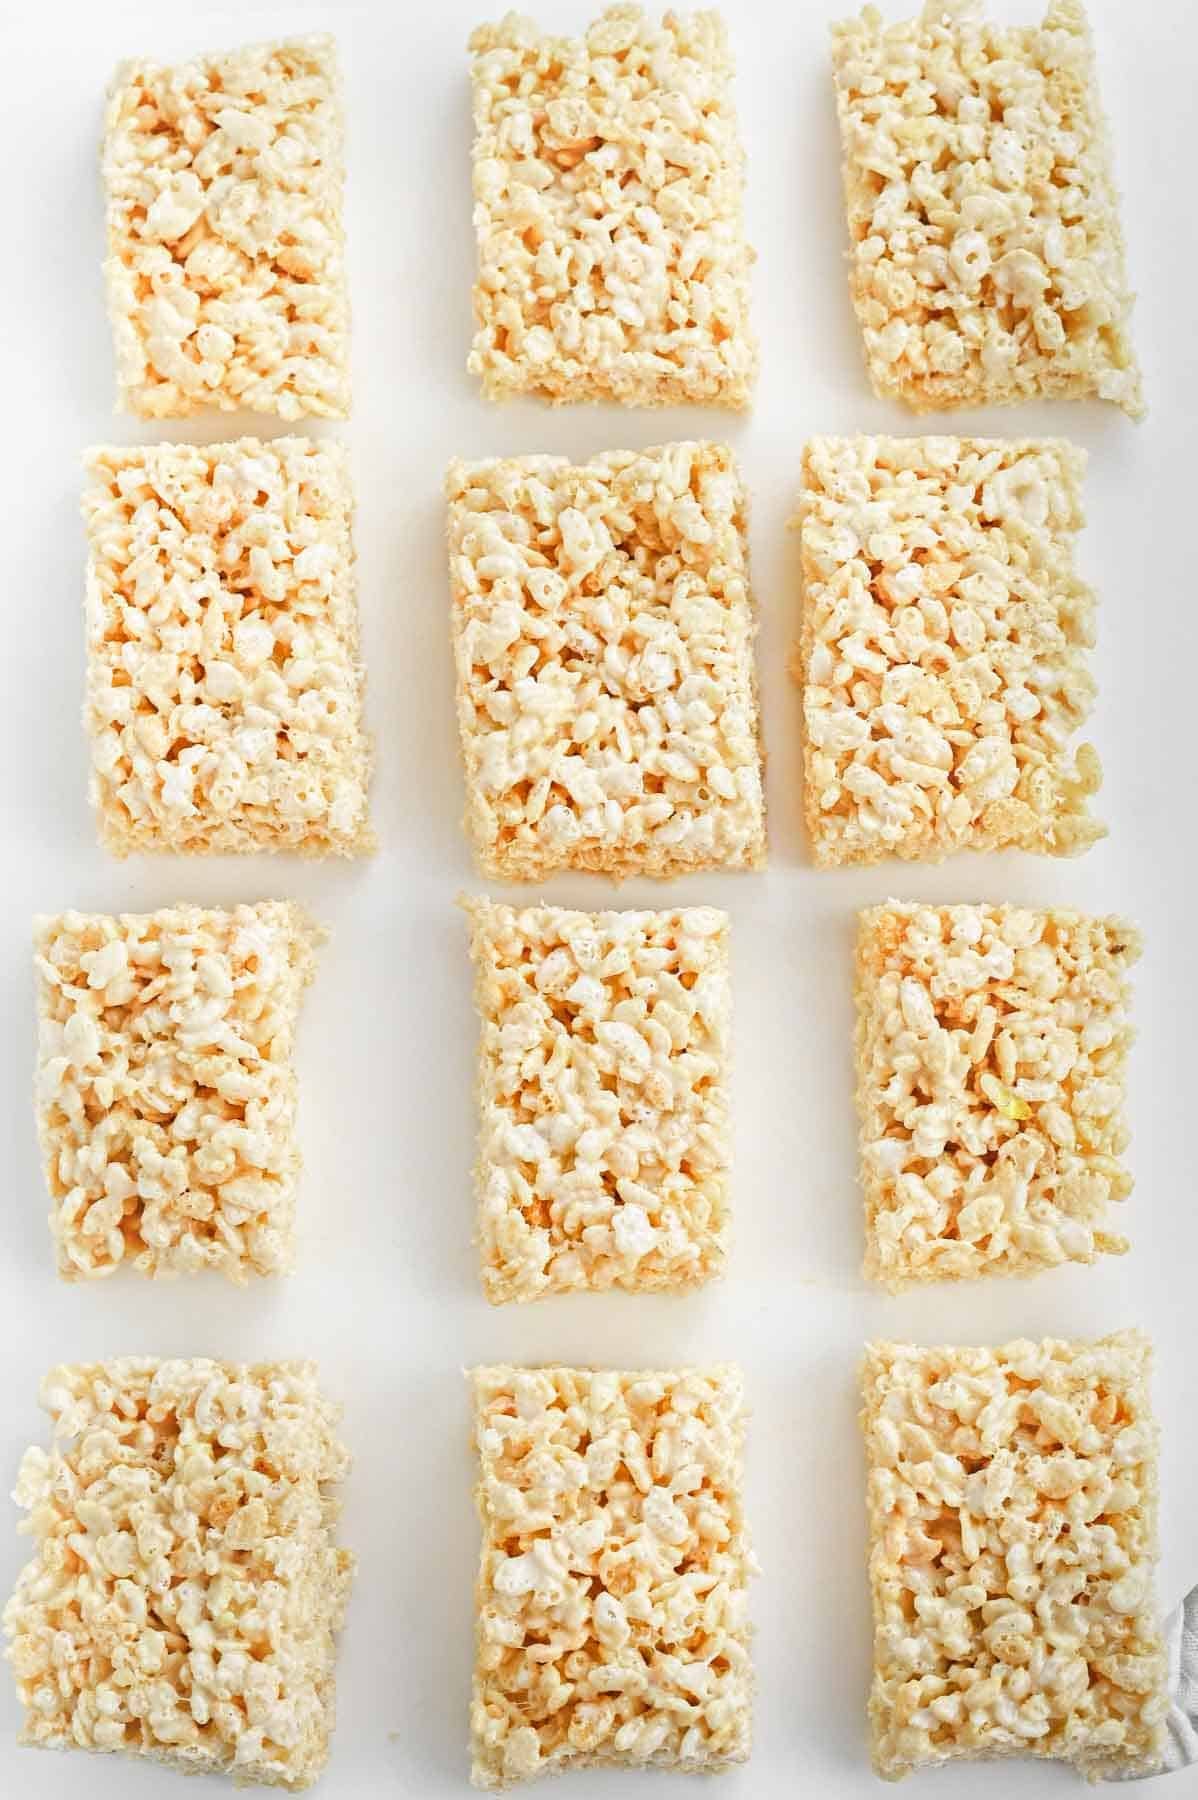 Rice krispie squares on a white surface.